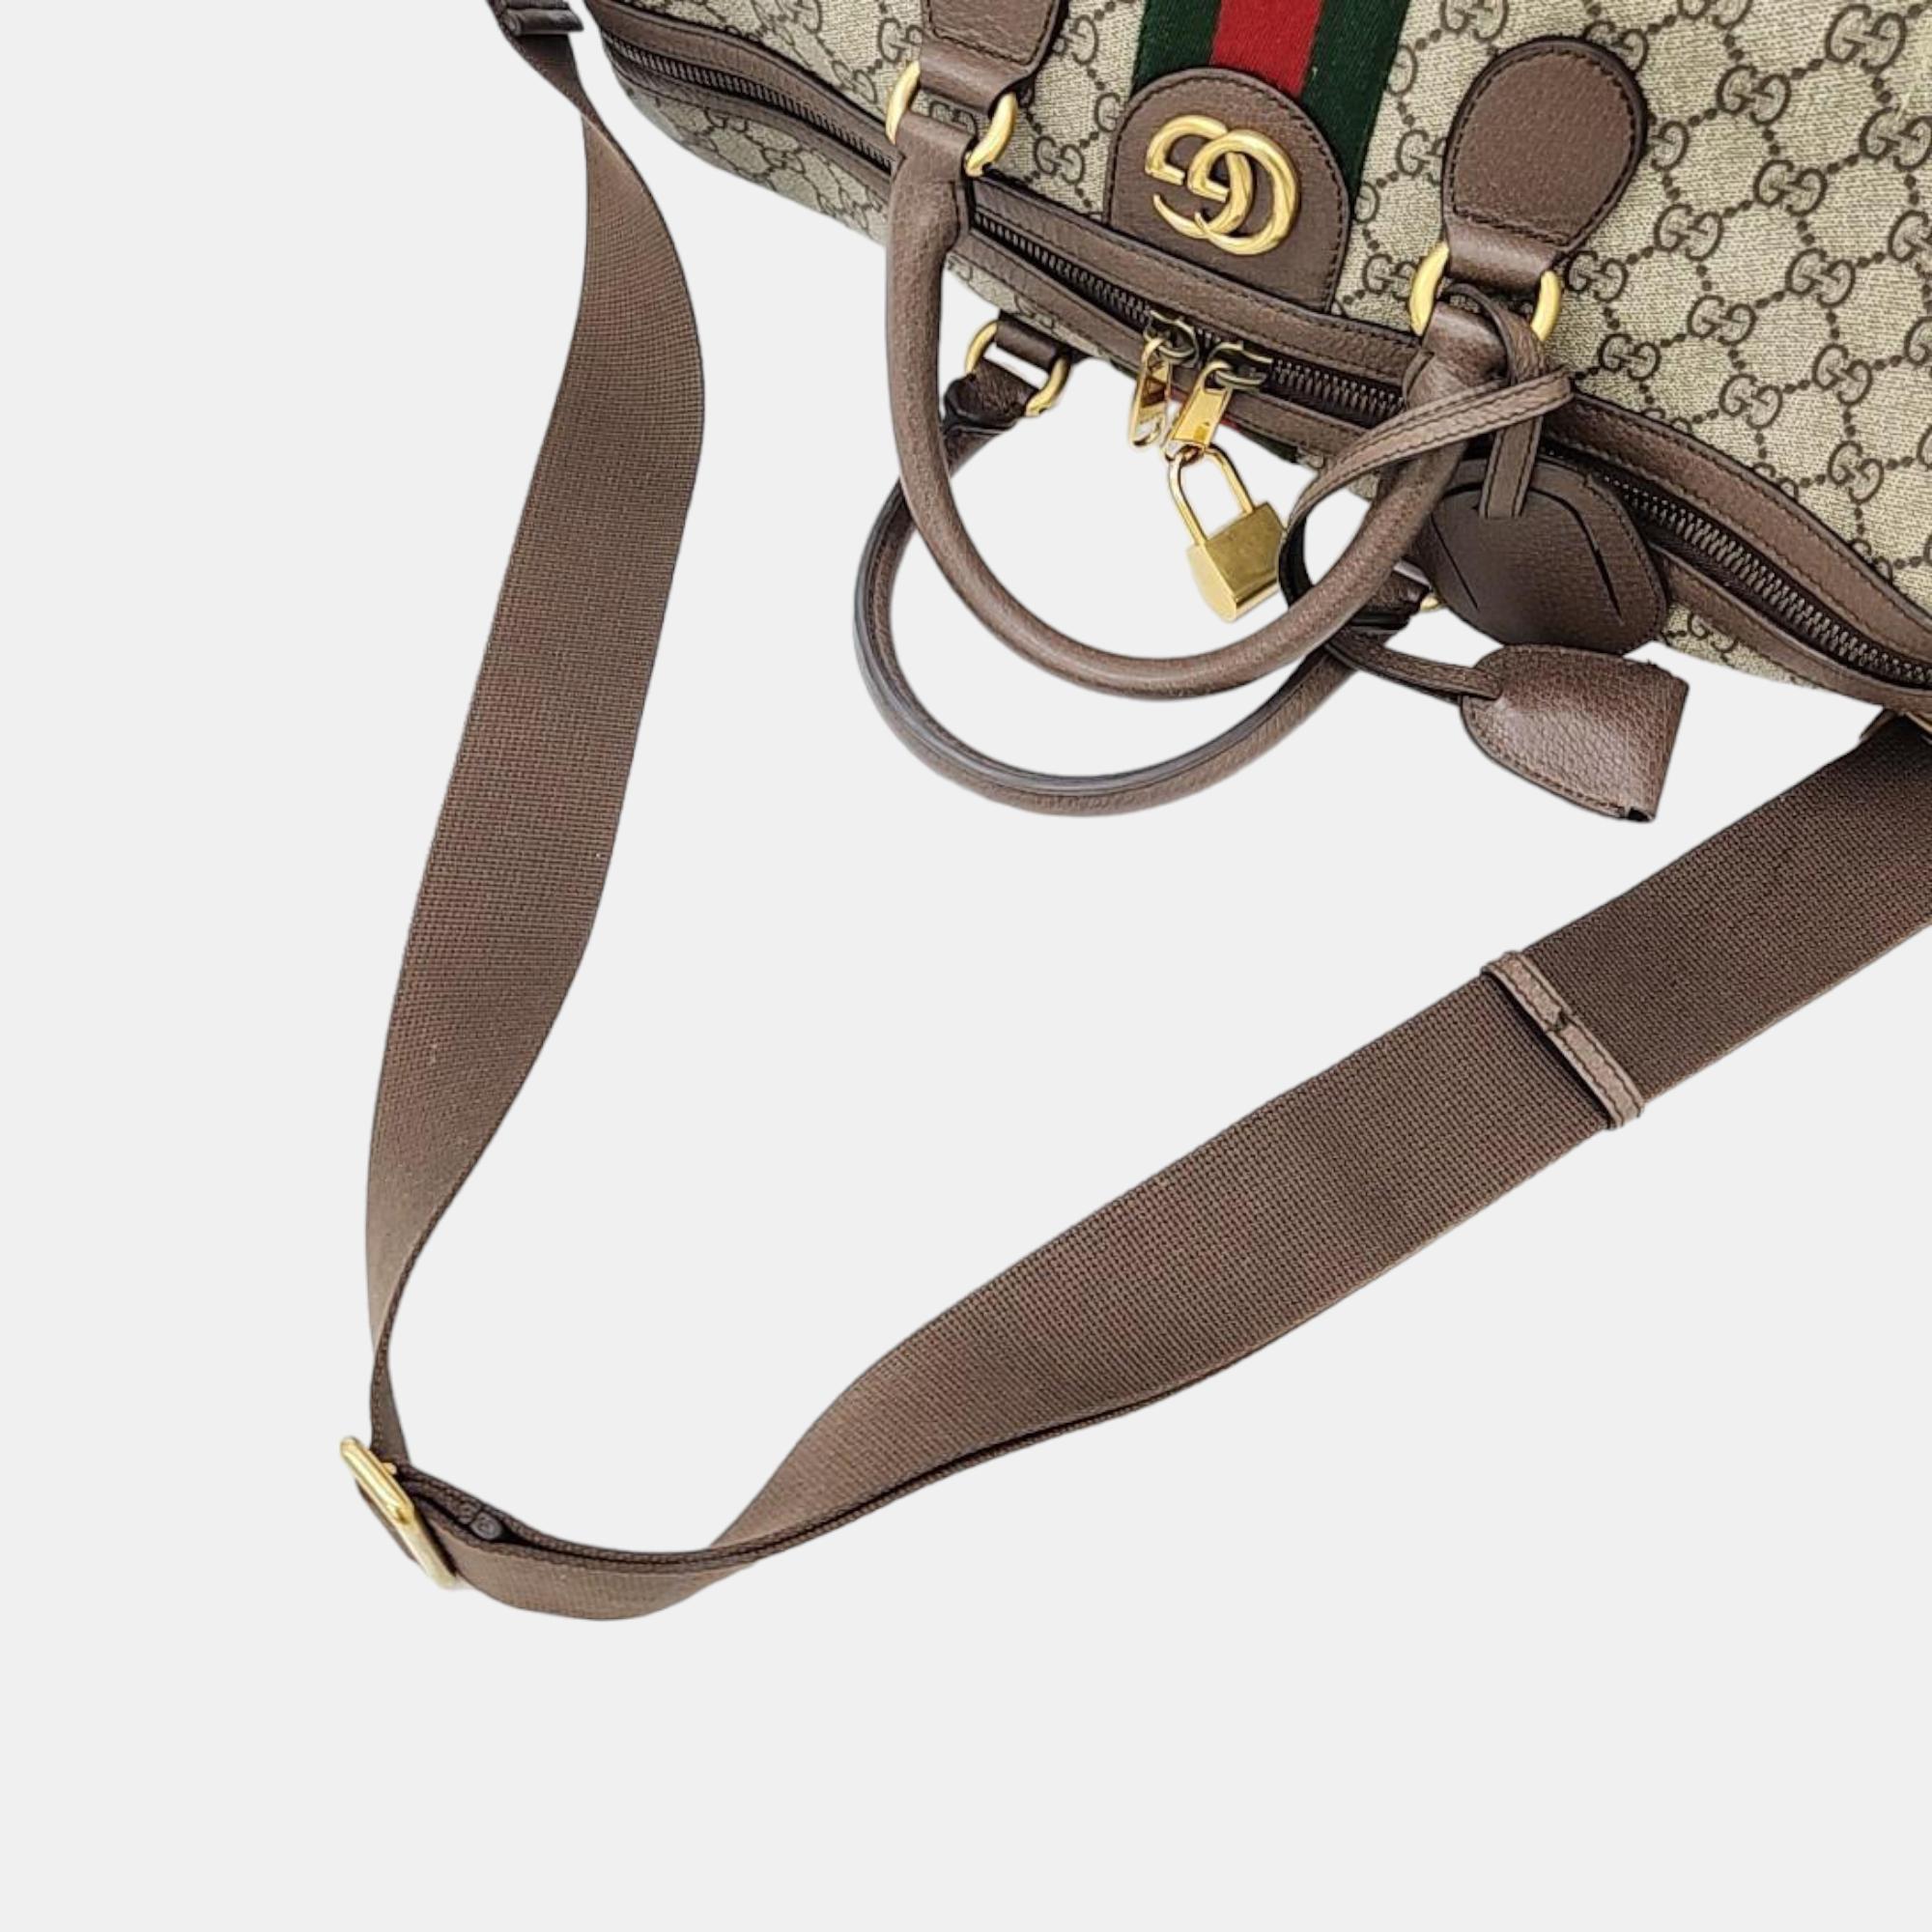 Gucci Ophidia Supreme Carry On Duffel Bag (547953)